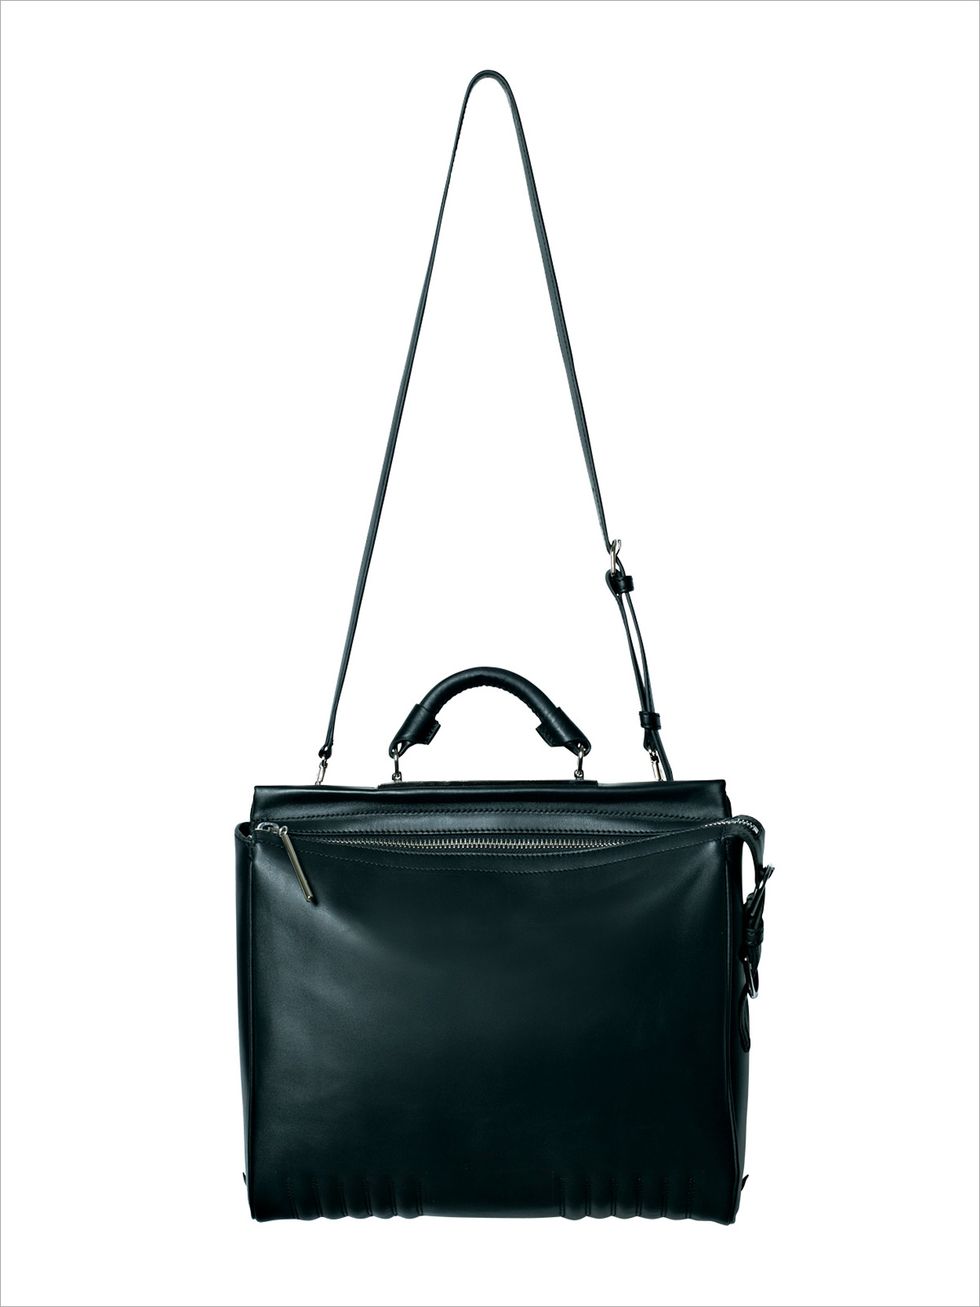 Product, Bag, White, Style, Luggage and bags, Shoulder bag, Black, Leather, Black-and-white, Material property, 